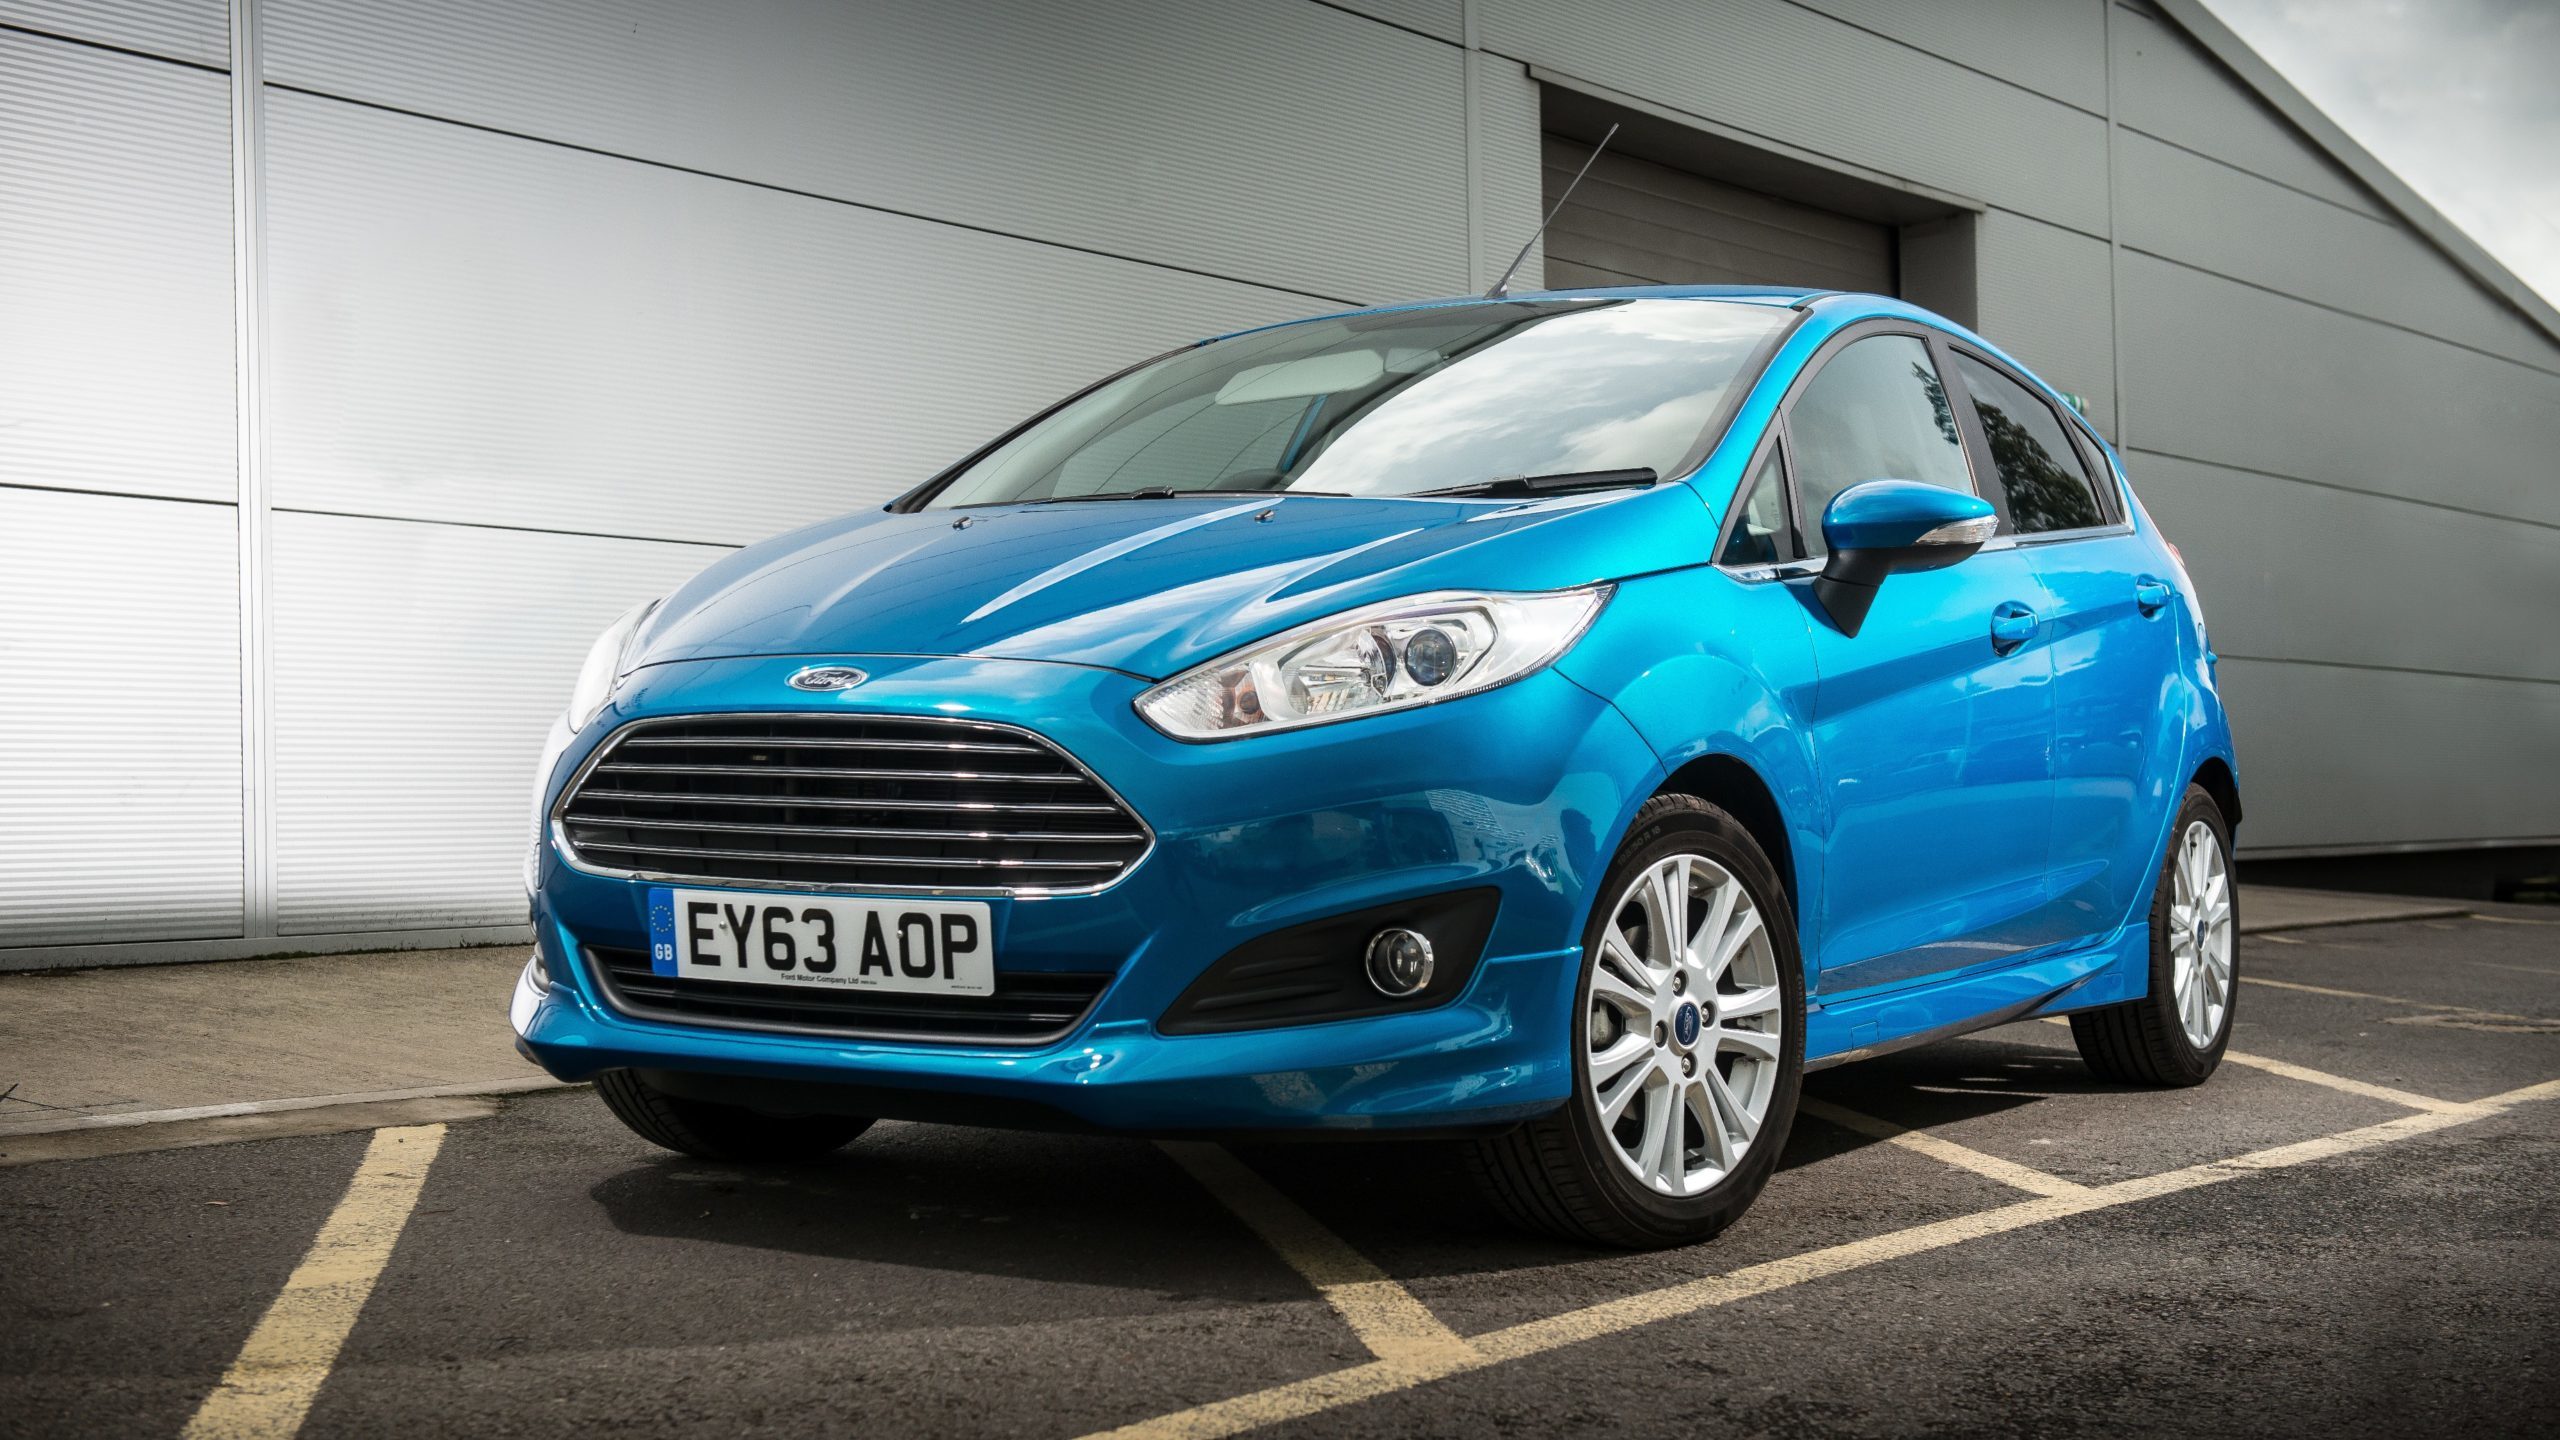 https://carwow-uk-wp-3.imgix.net/001-prThe-Ford-Fiesta-is-the-UKs-best-selling-car-for-the-fifth-successive-year-scaled-e1659433438867.jpg